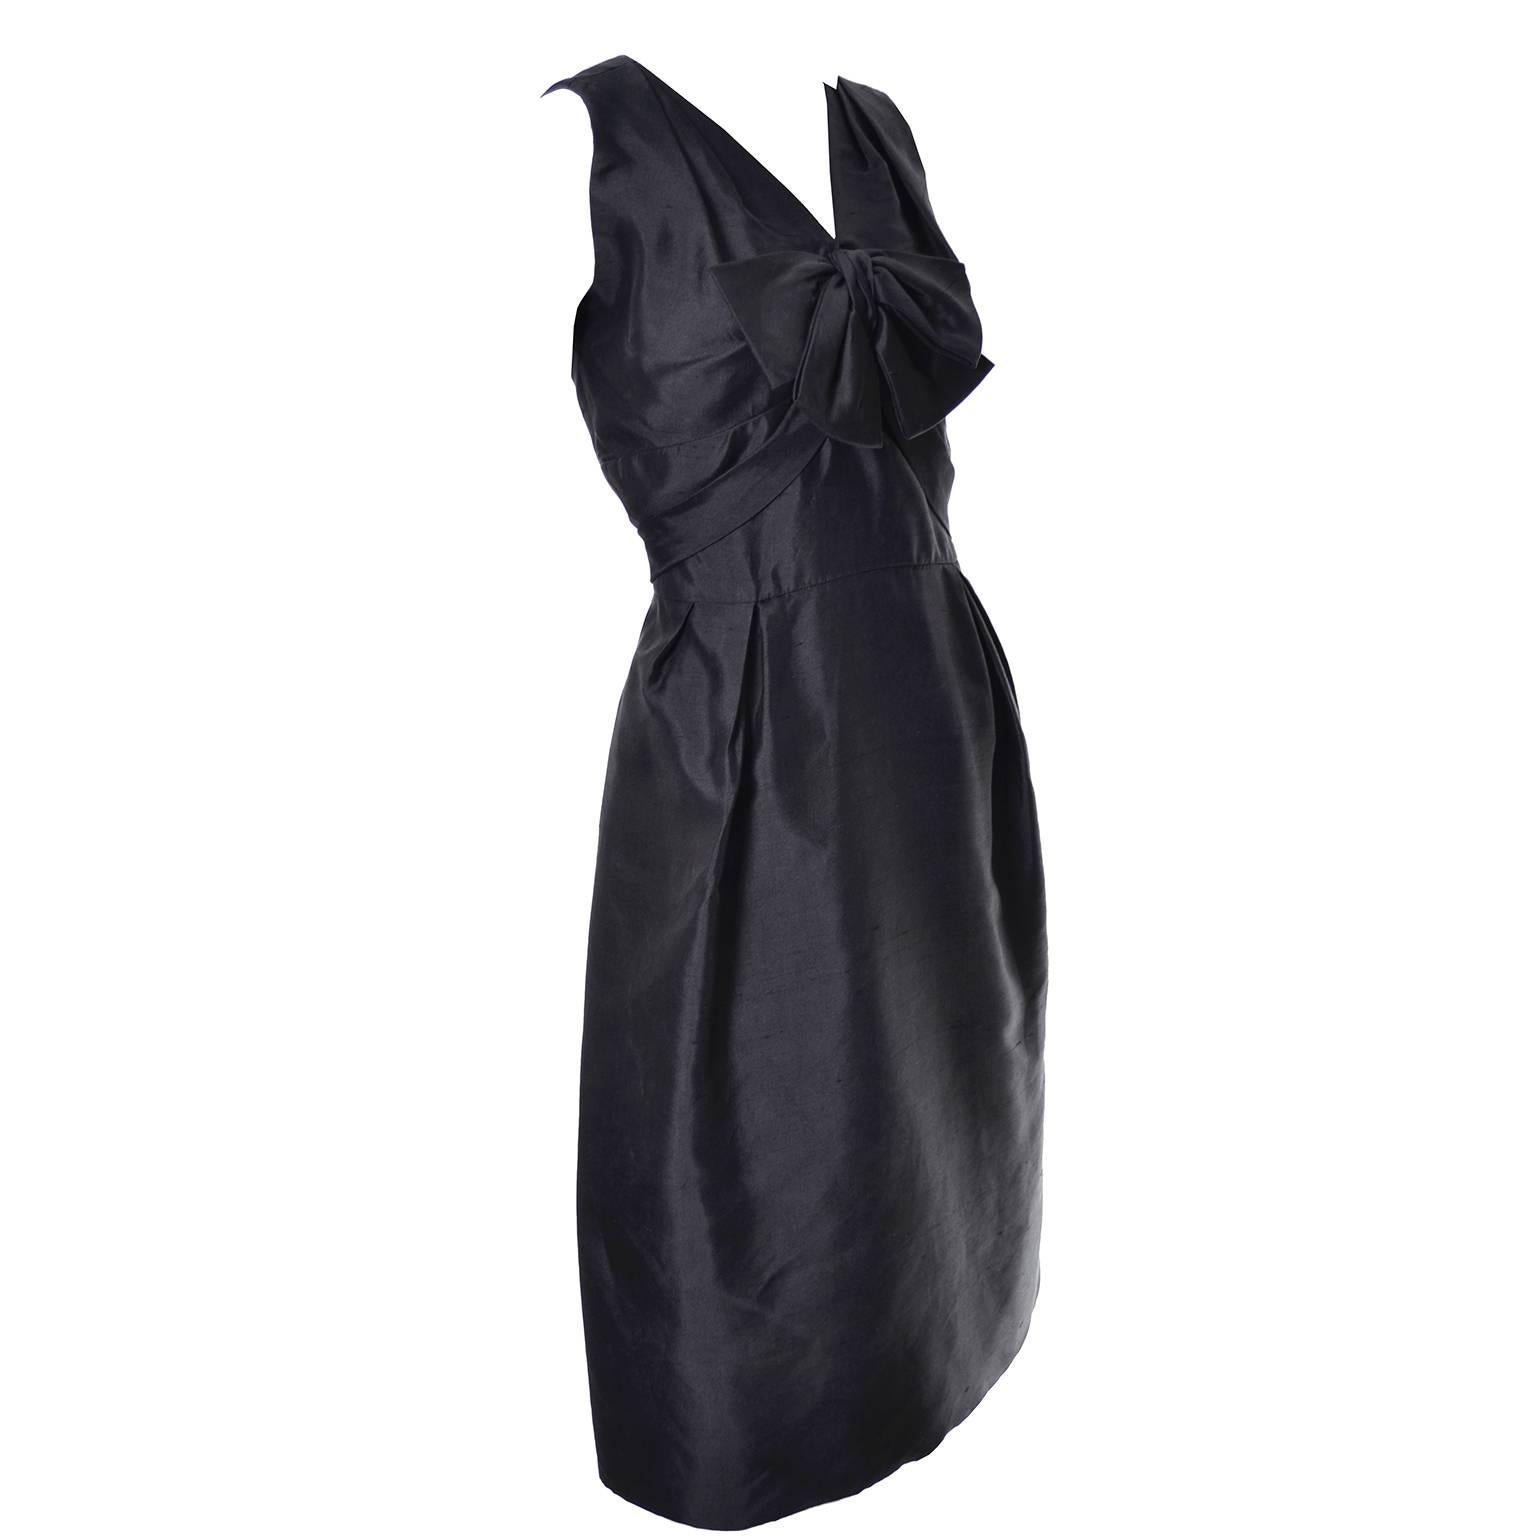 I love this vintage little black dress! This sensational black silk sleeveless dress was designed by Adele Simpson and purchased at the exclusive boutique Nicholas Ungar in the late 1950’s. I love the bow on the bodice and the sash that drapes from